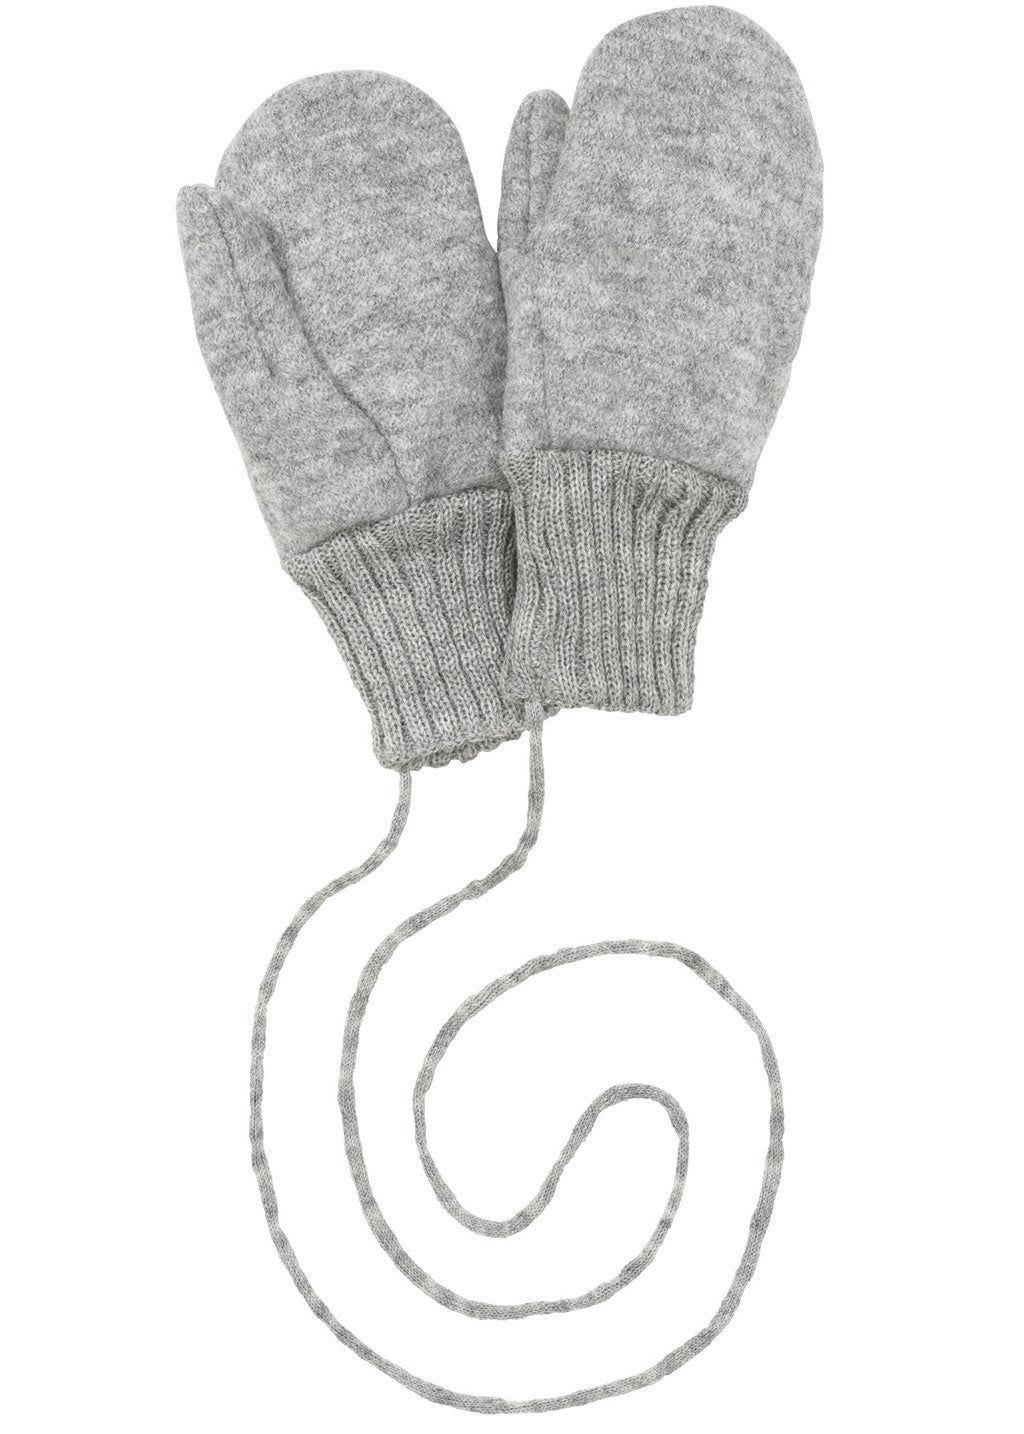 Disana boiled wool mittens in gray